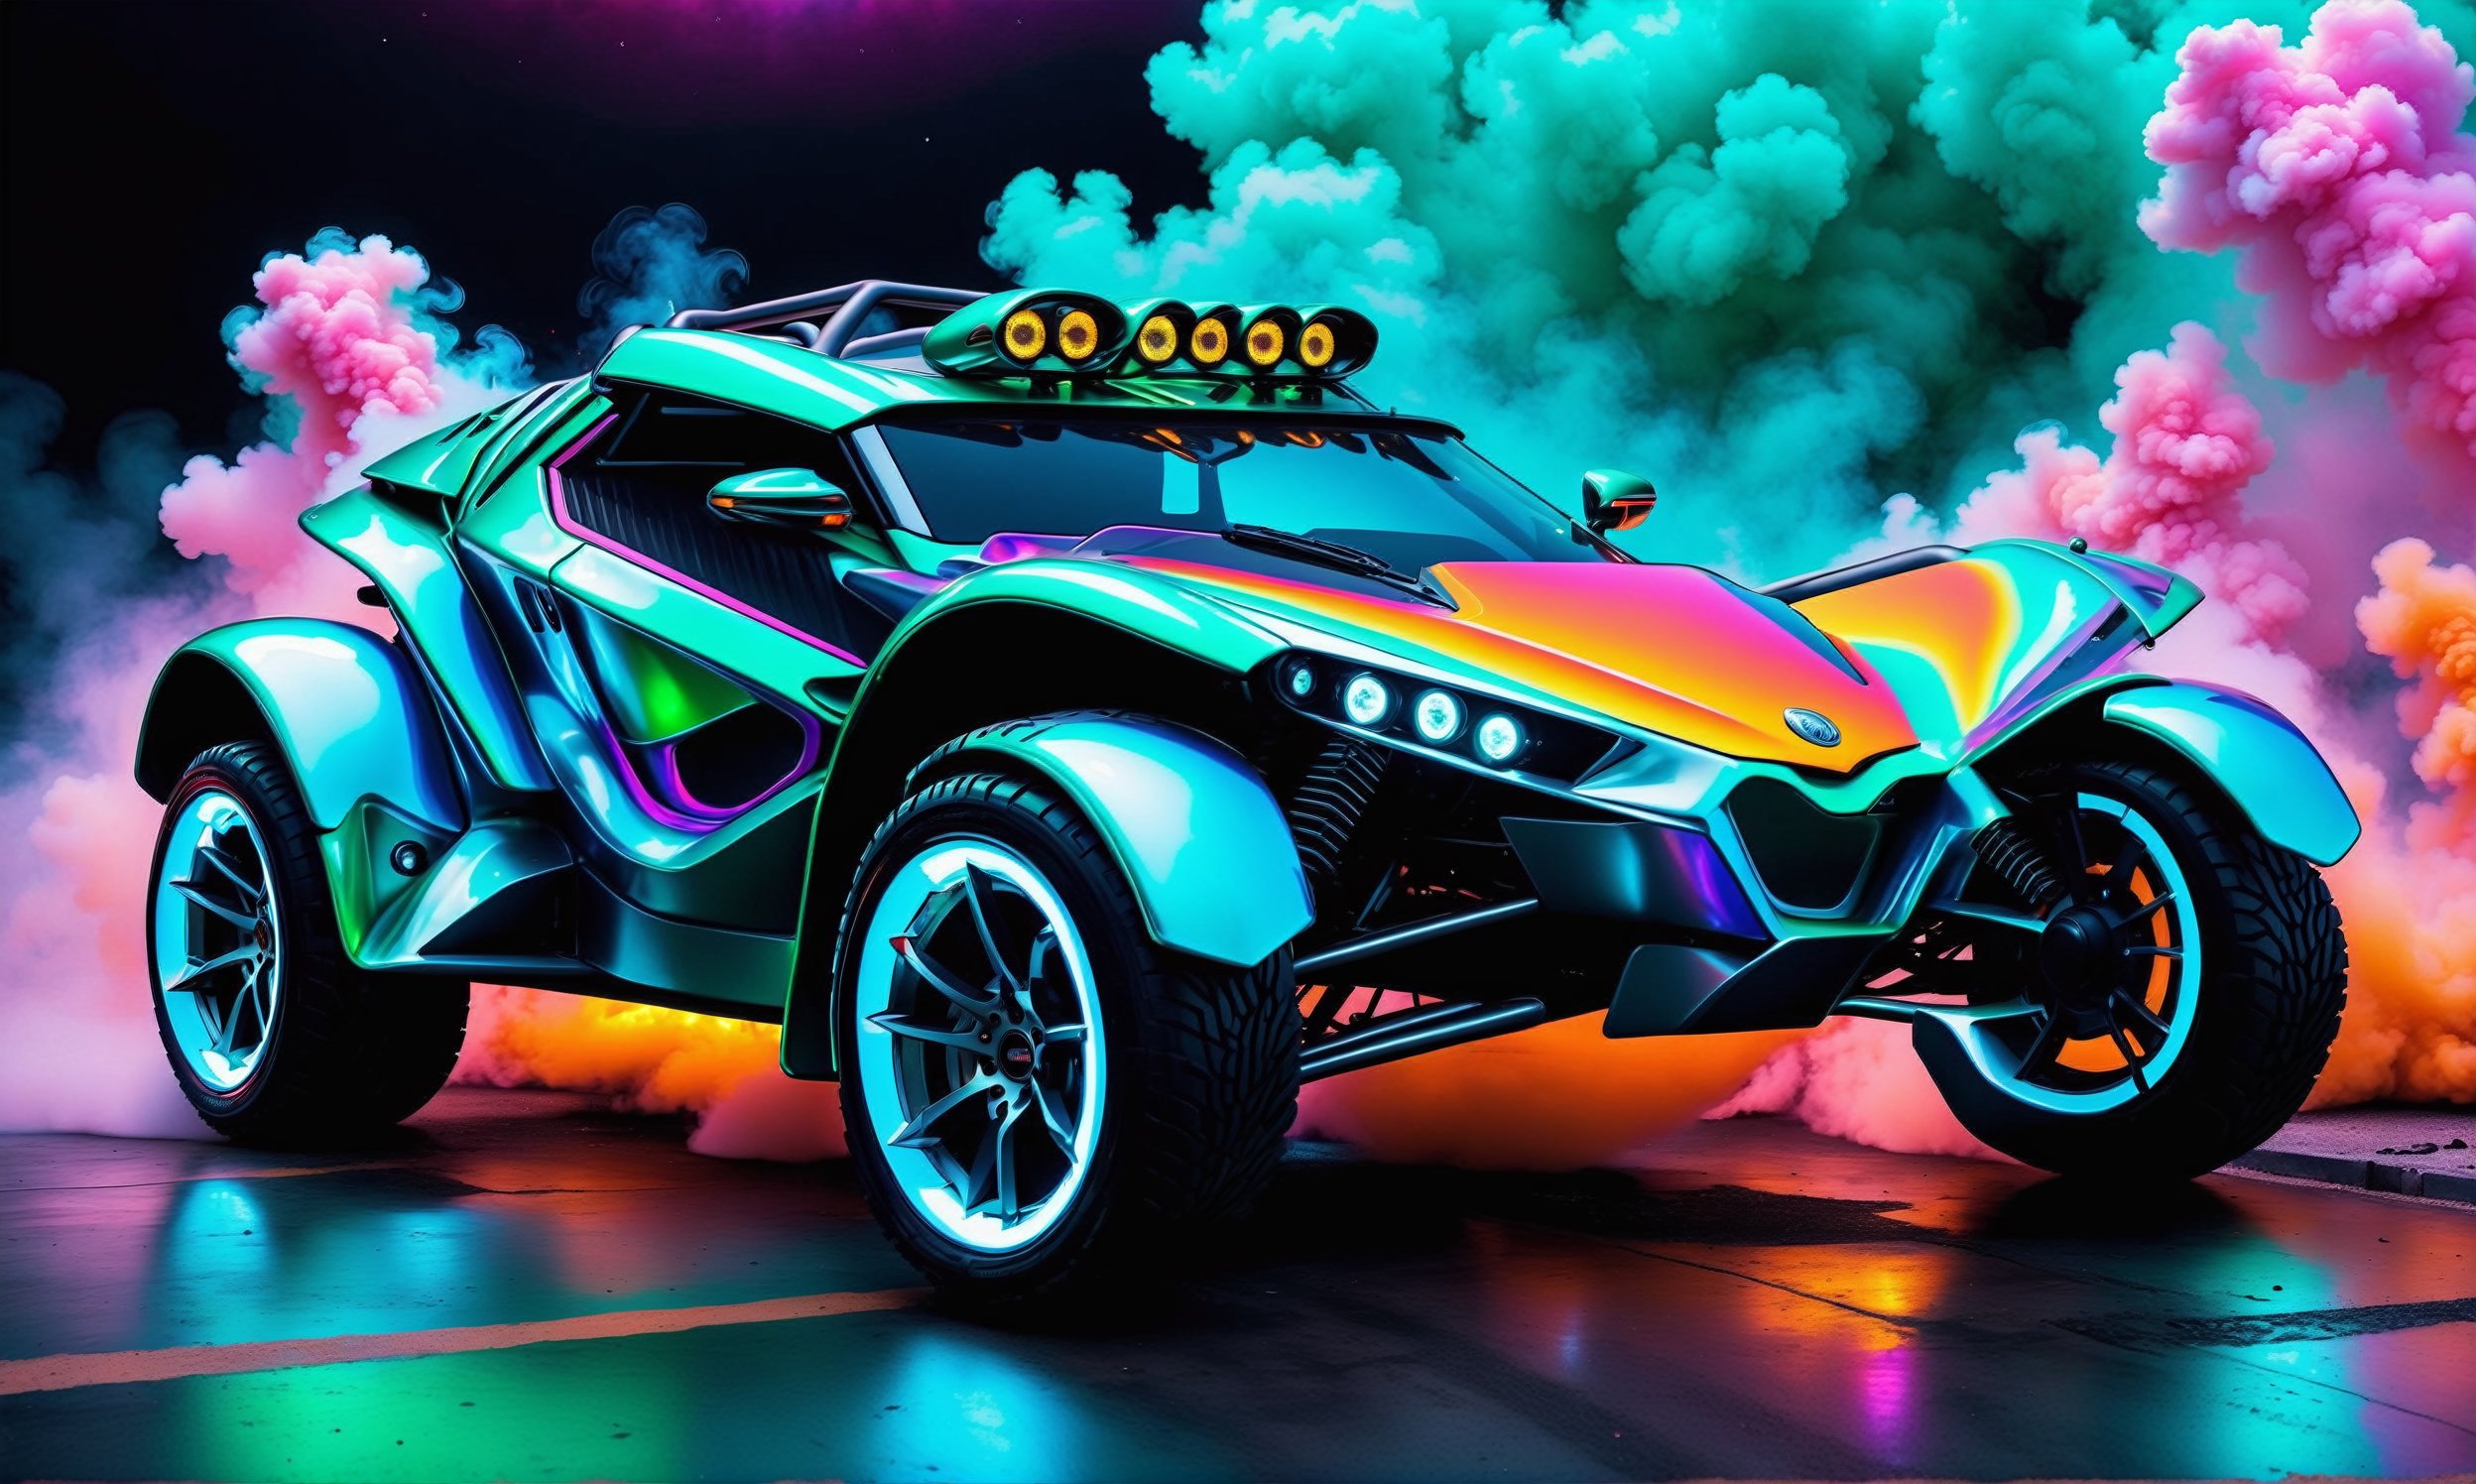 front  view, ultra relistic,  of a green ariel nomad  with headlights on, a light bar on the roof shining bright beams of white light ,  background of colorful smoke , ✏️🎨, 8k stunning artwork, vapor wave, neon smoke, hyper colorful, stunning art style, car with holographic paint, amazing wallpaper, futuristic art style, 8 k highly detailed ❤🔥 🔥 💀 🤖 🚀4k phone wallpaper, inspired by Mike Winkelmann, ,H effect,colorful